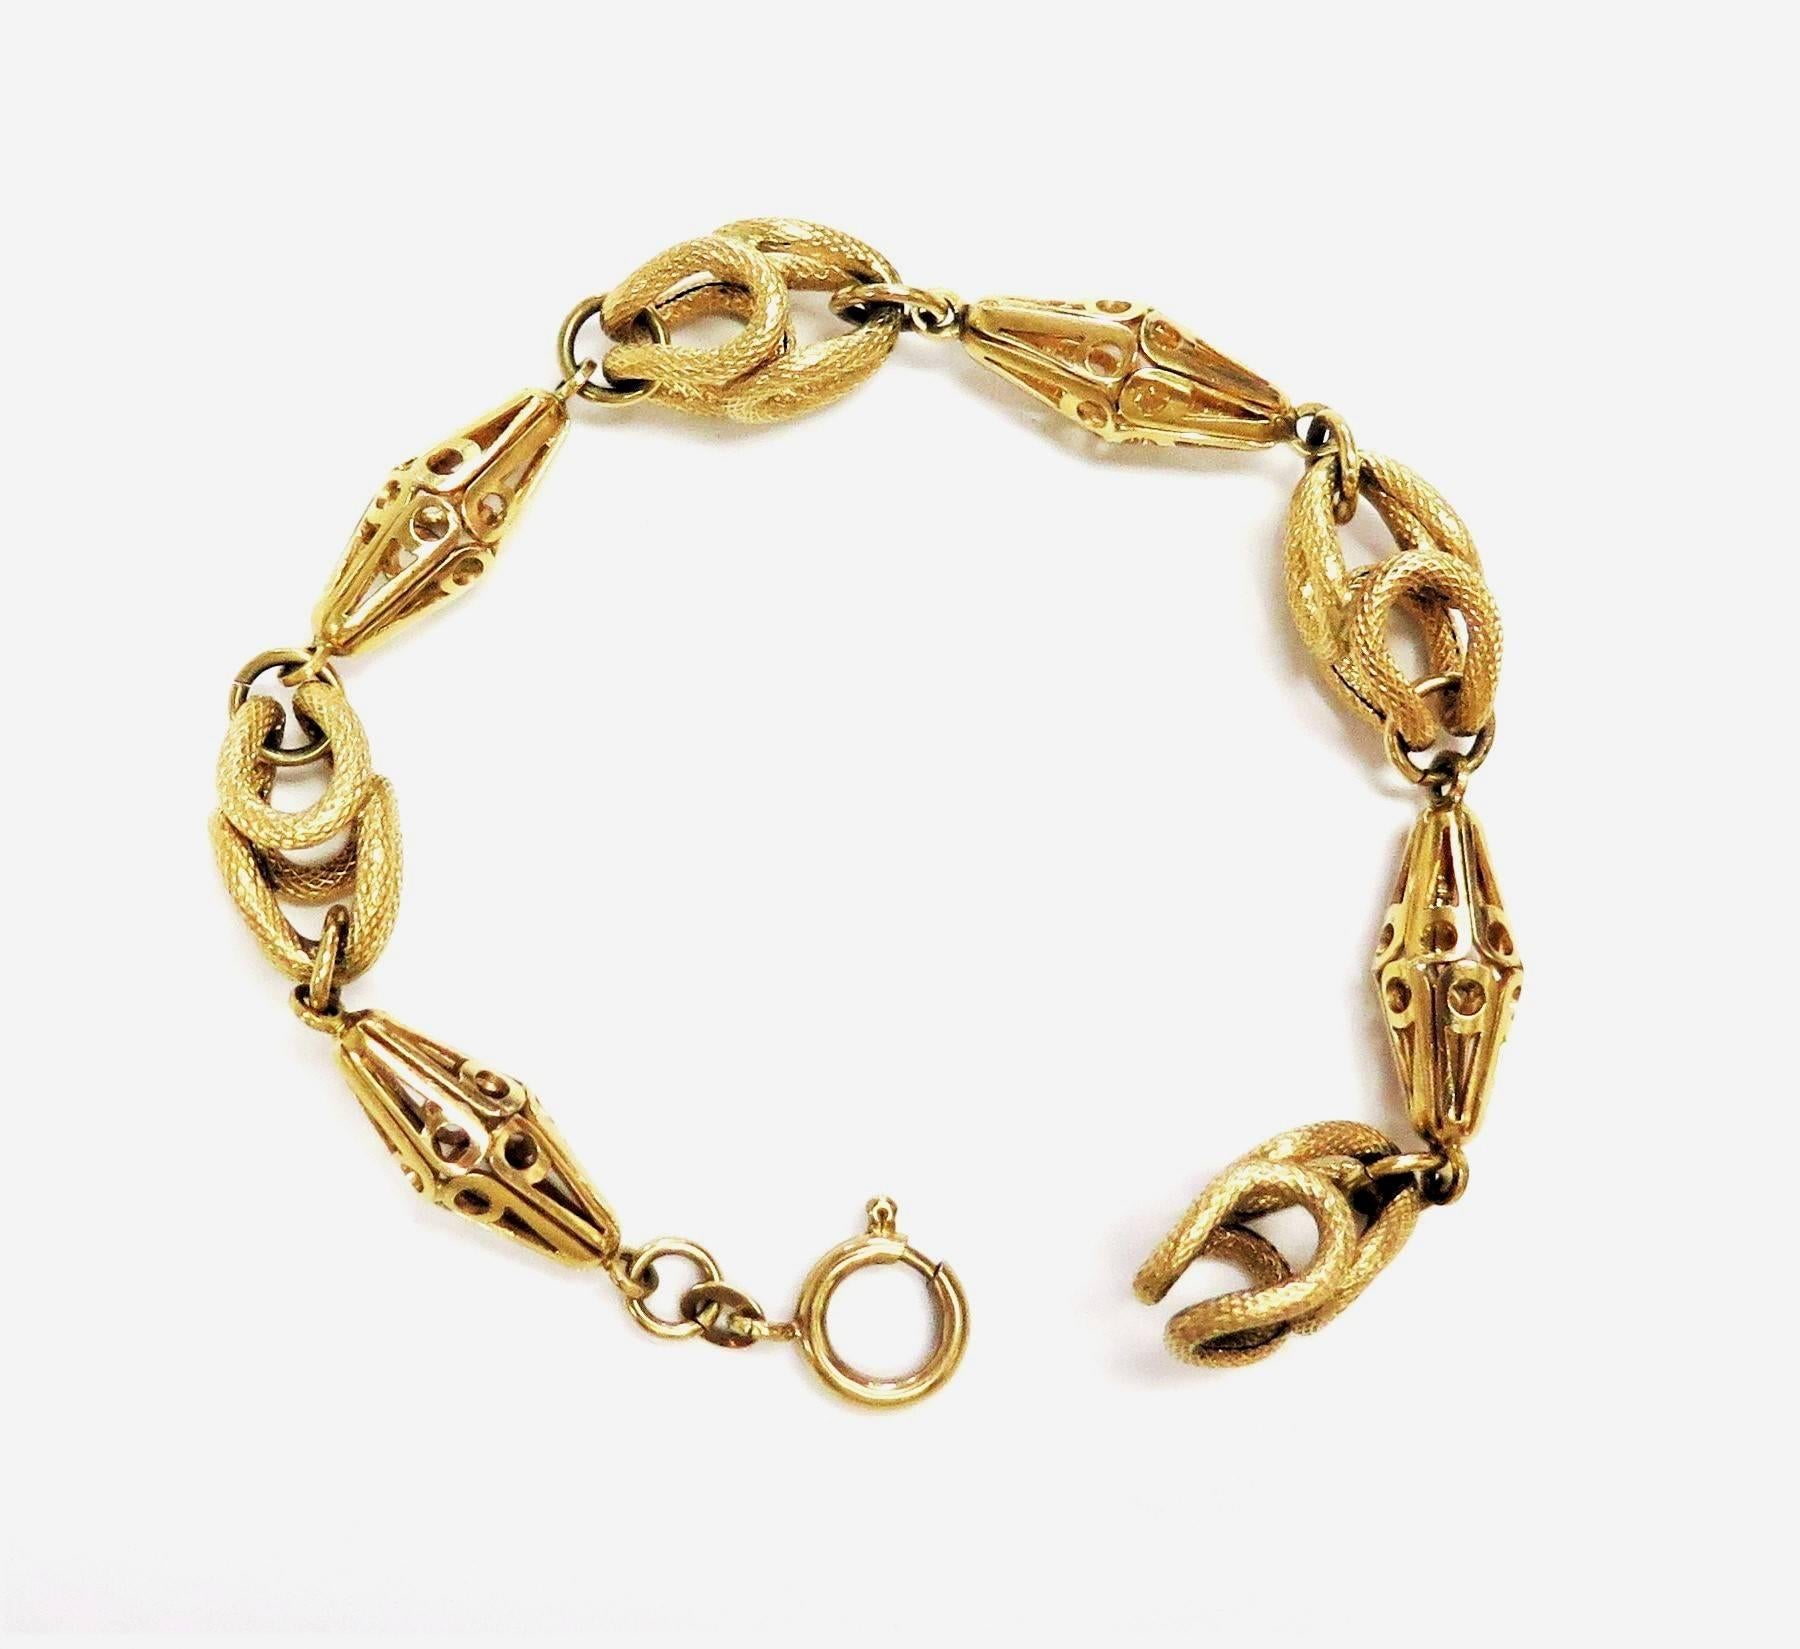 This lovely 18 karat yellow gold chain bracelet features very unique links.
Twisted textured links attach to scrolled navette shaped links and each link is attached to the next one with a sturdy ring. The alternate use of links creates a highly